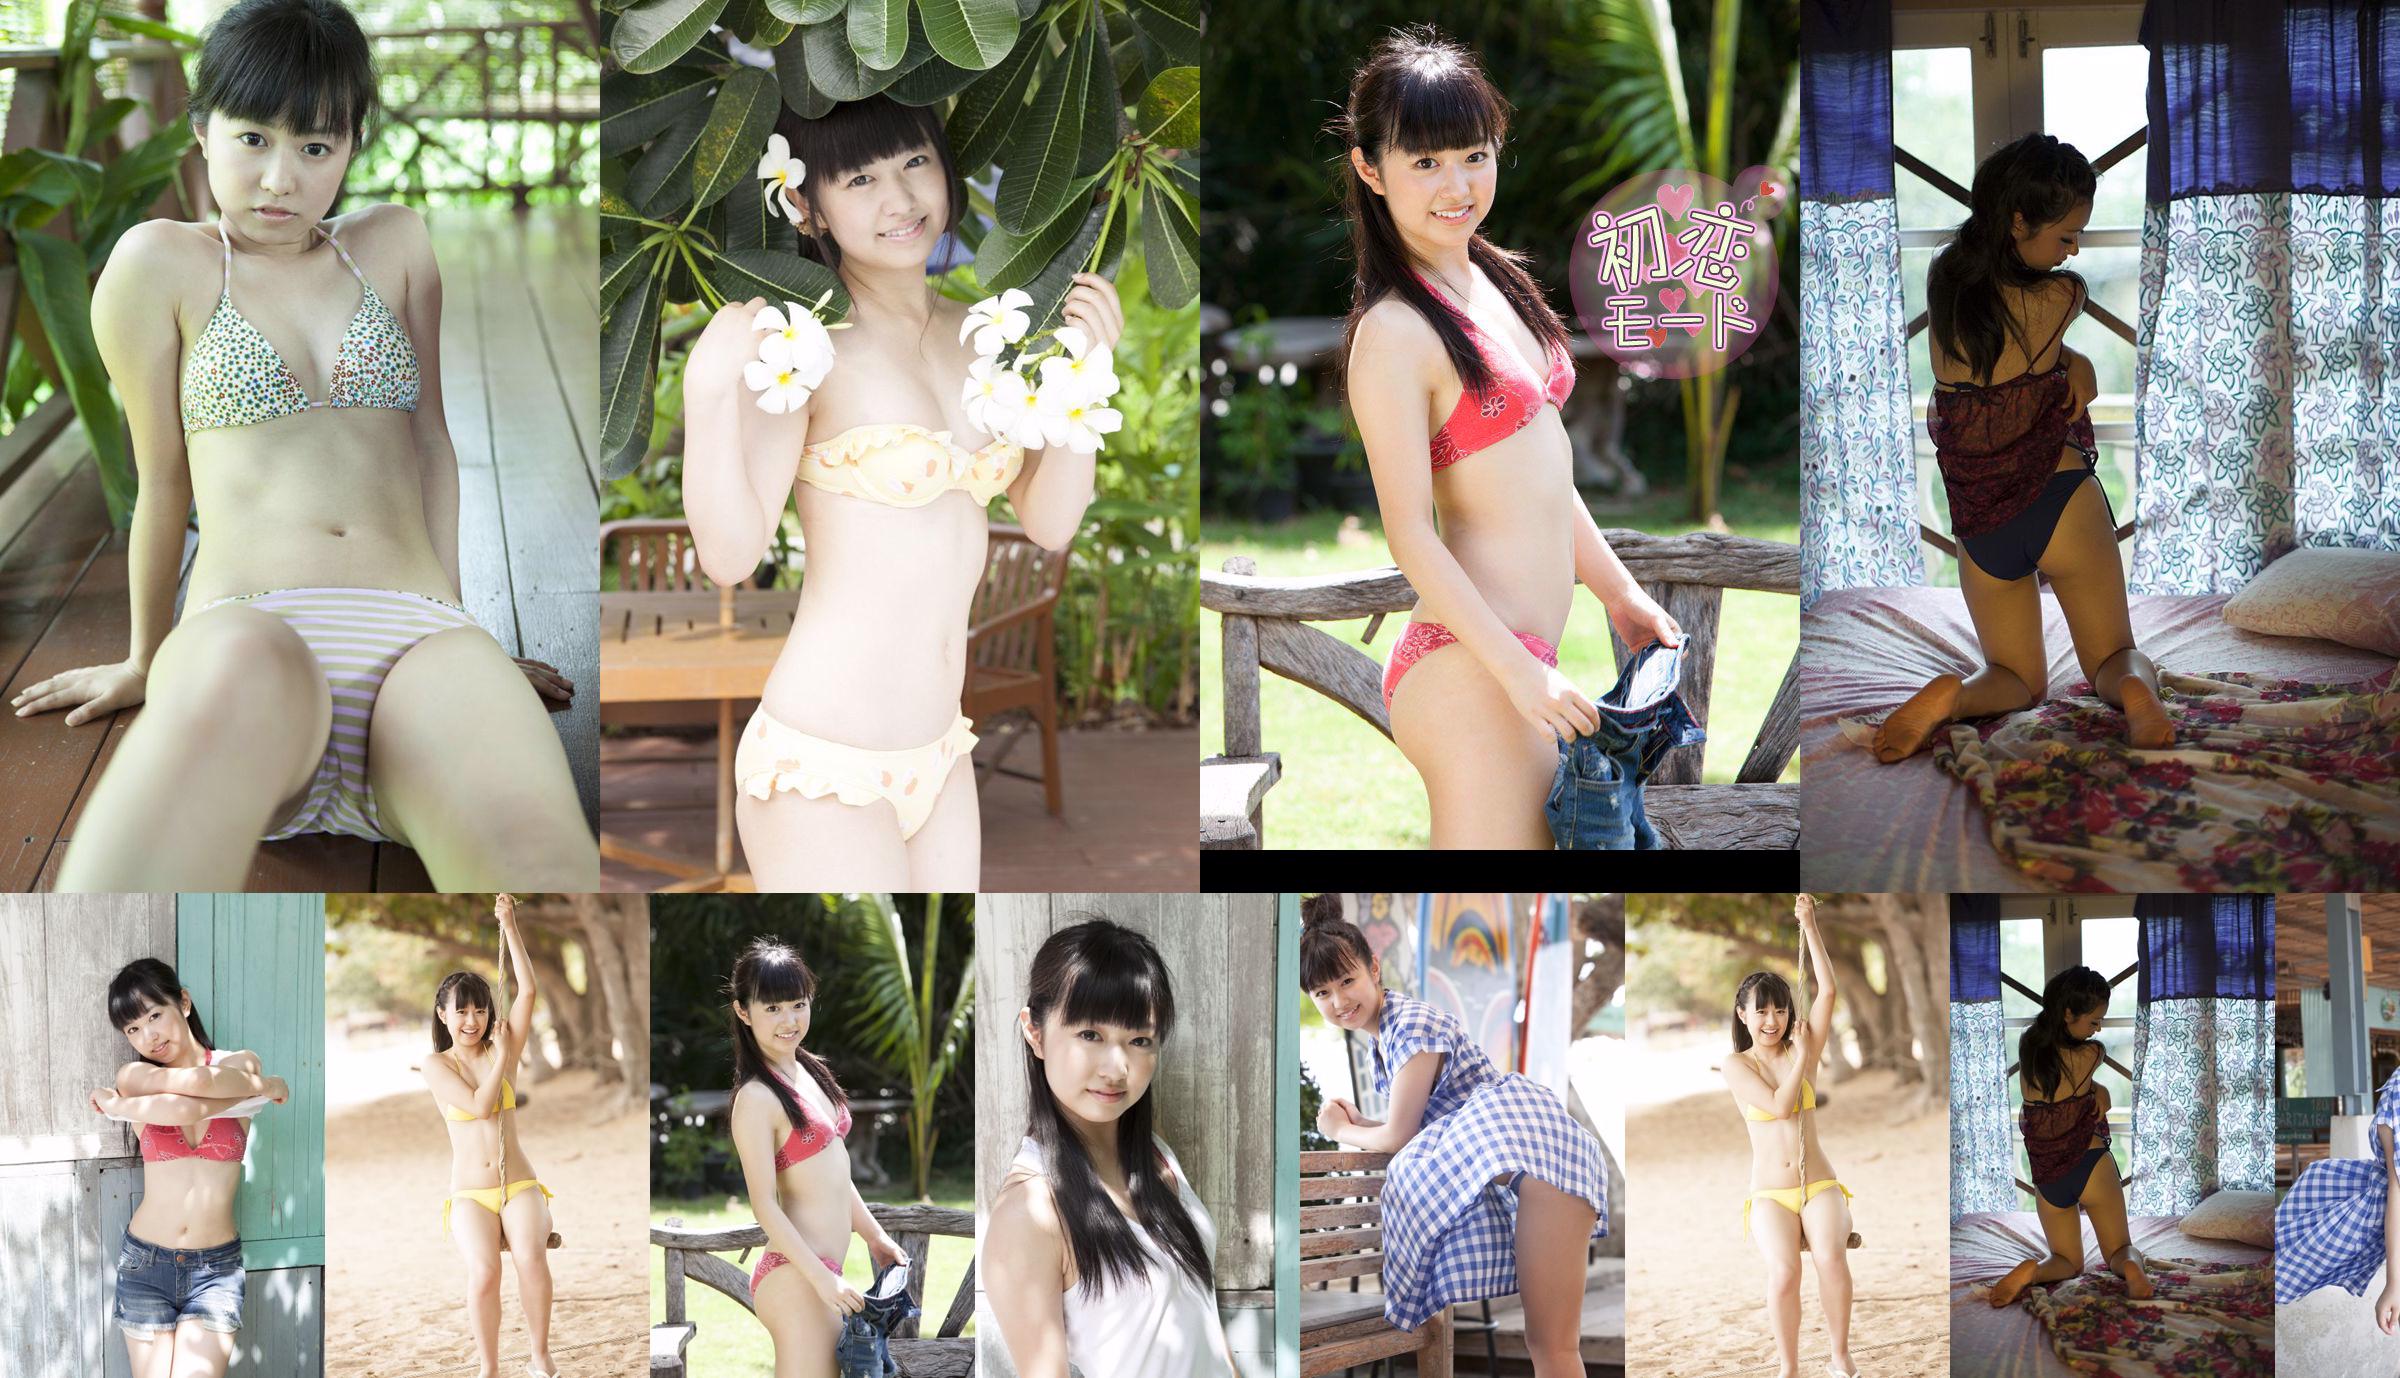 Ikura Aimi "First Love Mode" Part 1 [Image.tv] No.d00cb7 Page 1